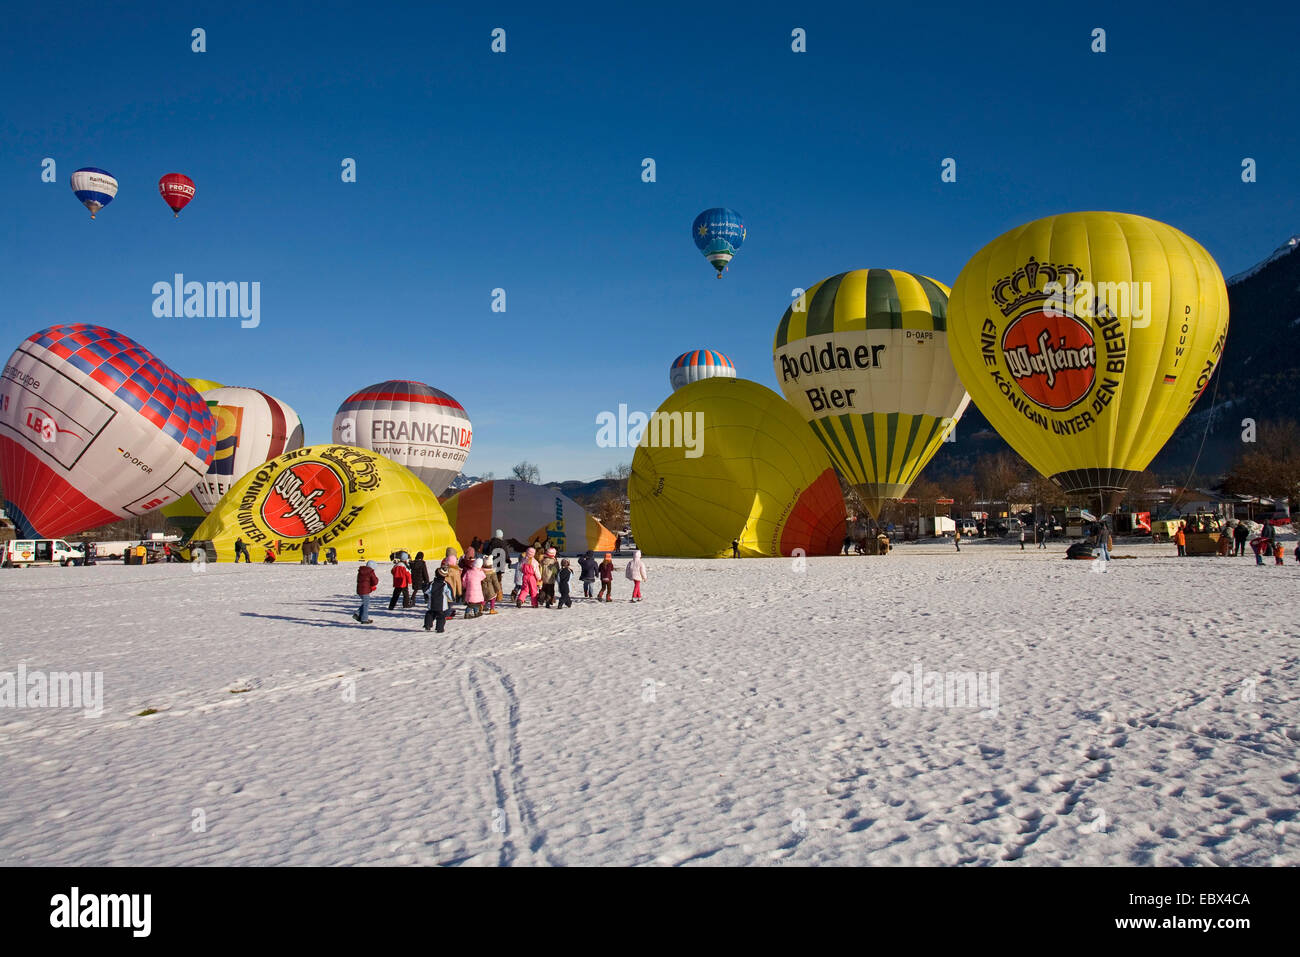 hot-air balloon festival on a snow field with several balloons being prepared for the start or having taken off and a lot of spectators, Germany, Bavaria, Allgaeu, Oberstdorf Stock Photo